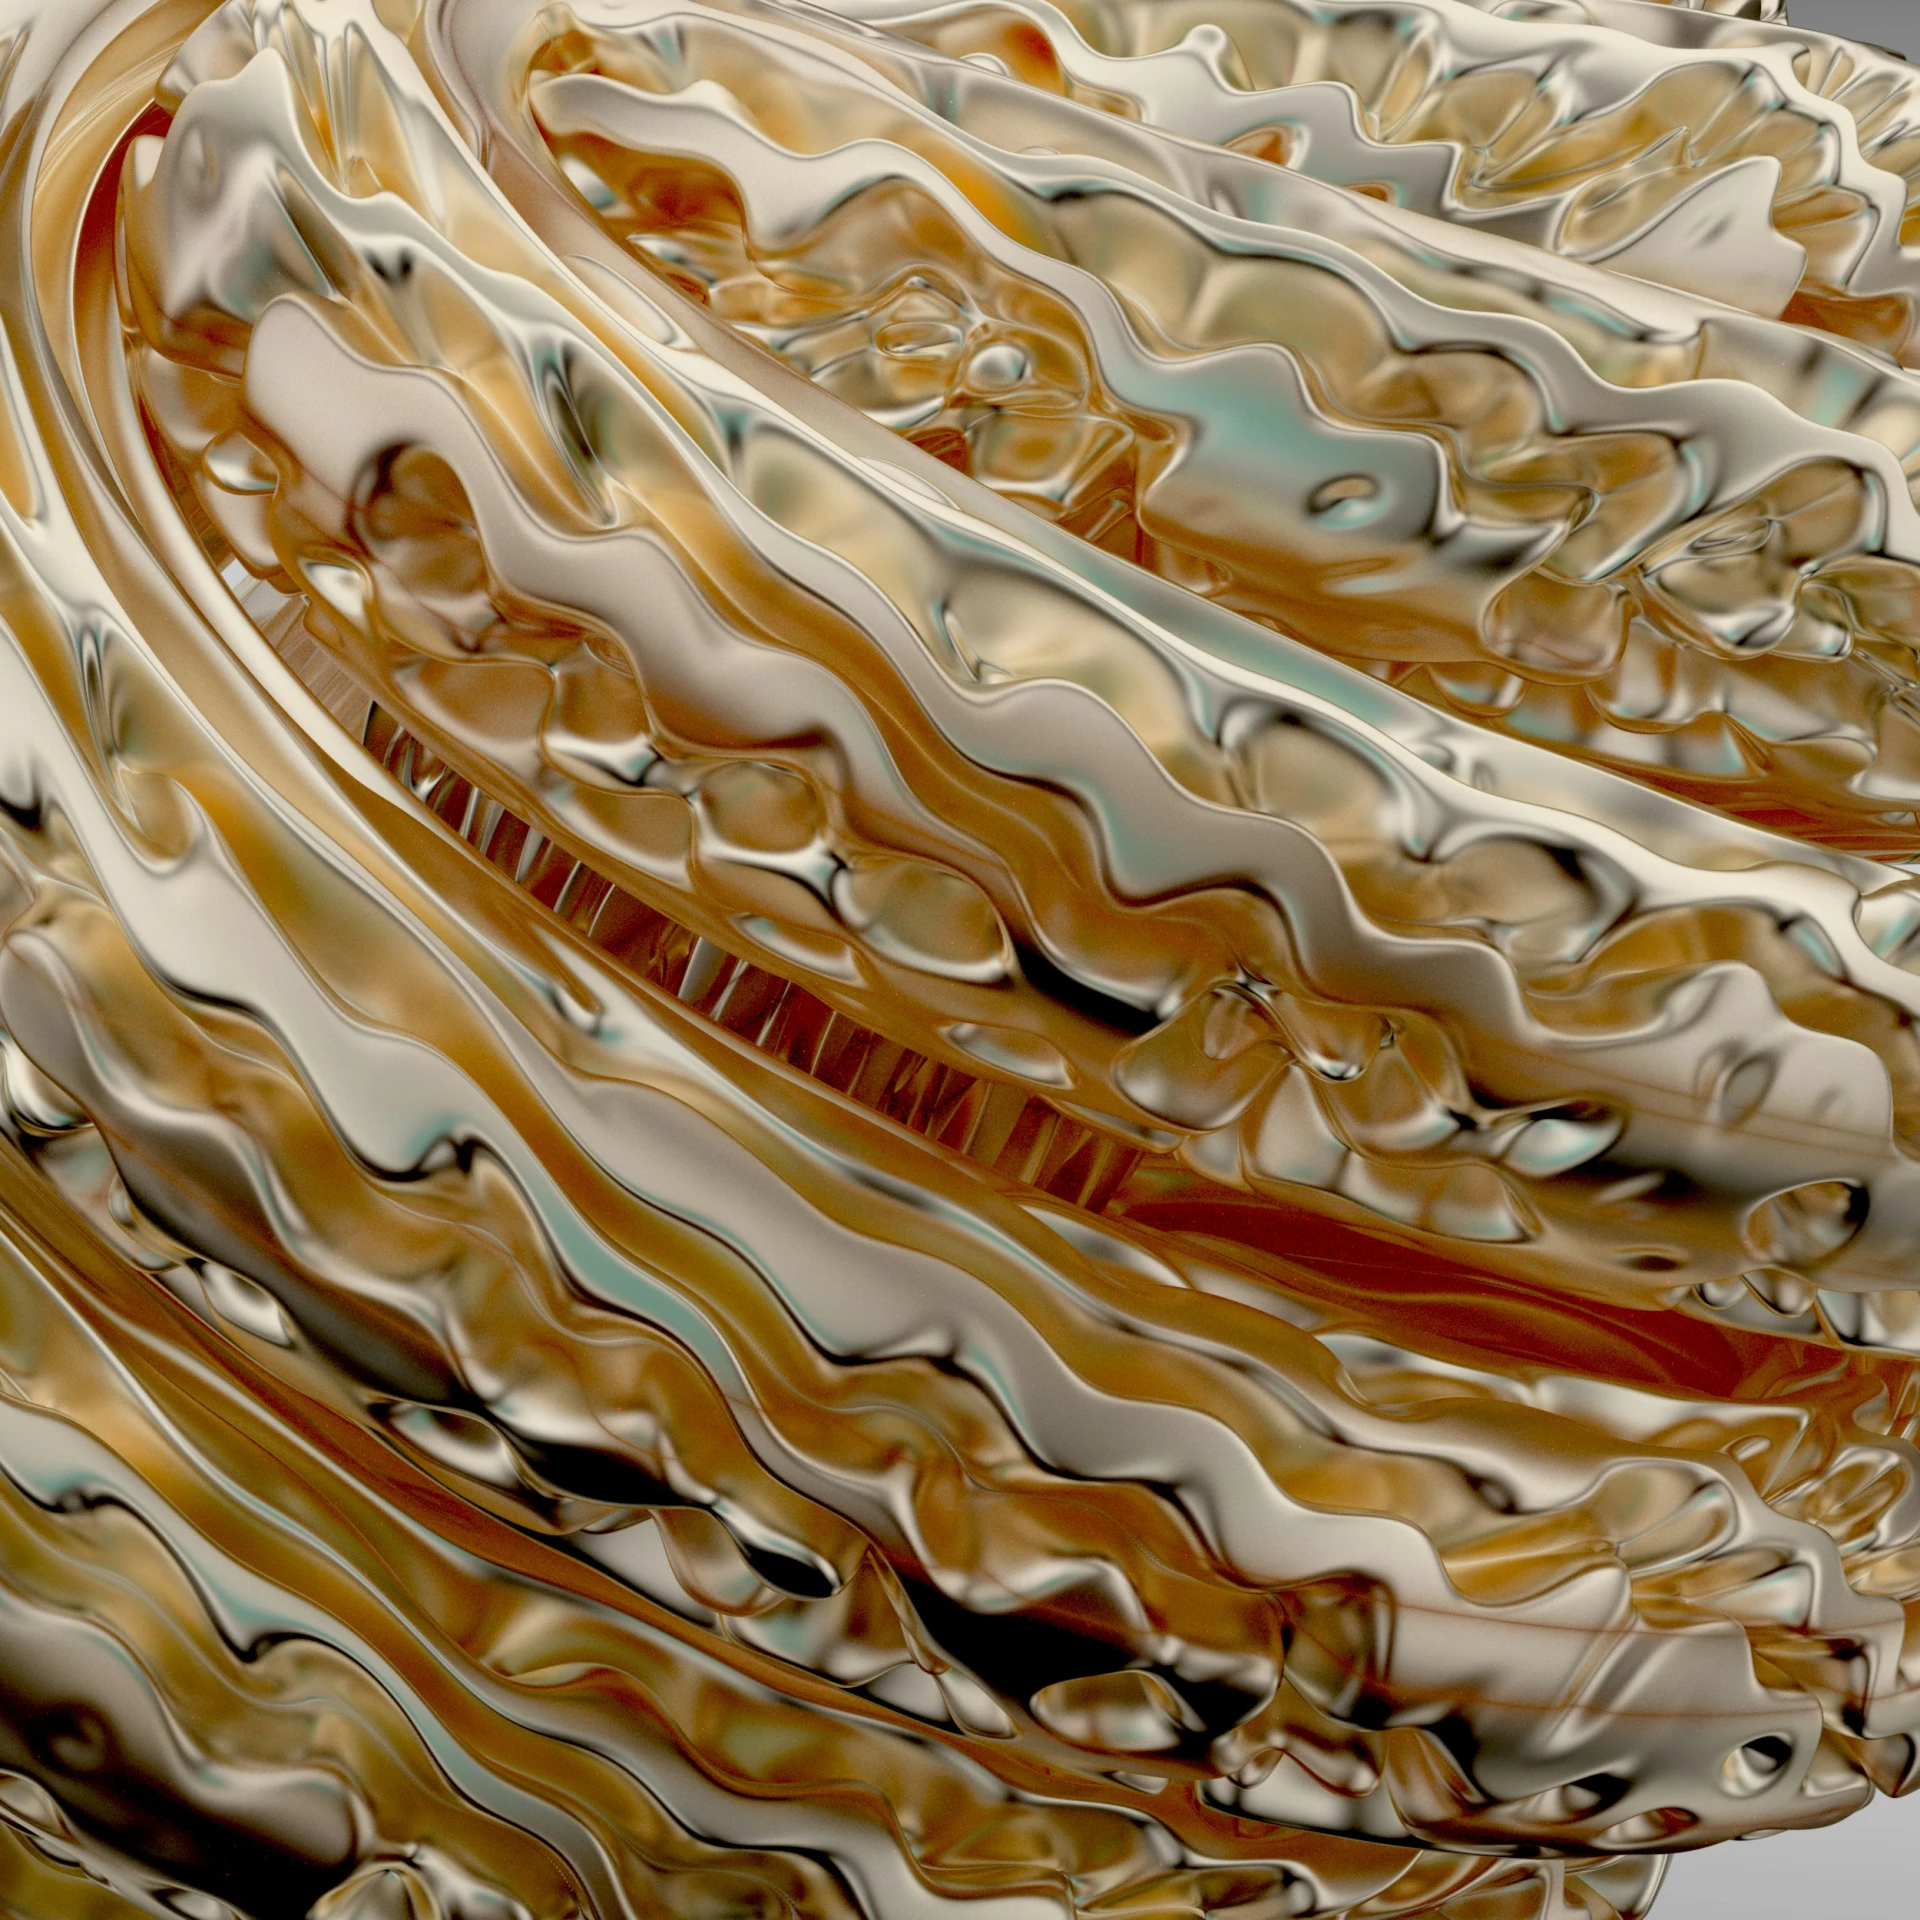 the glass is showing off a swirling pattern